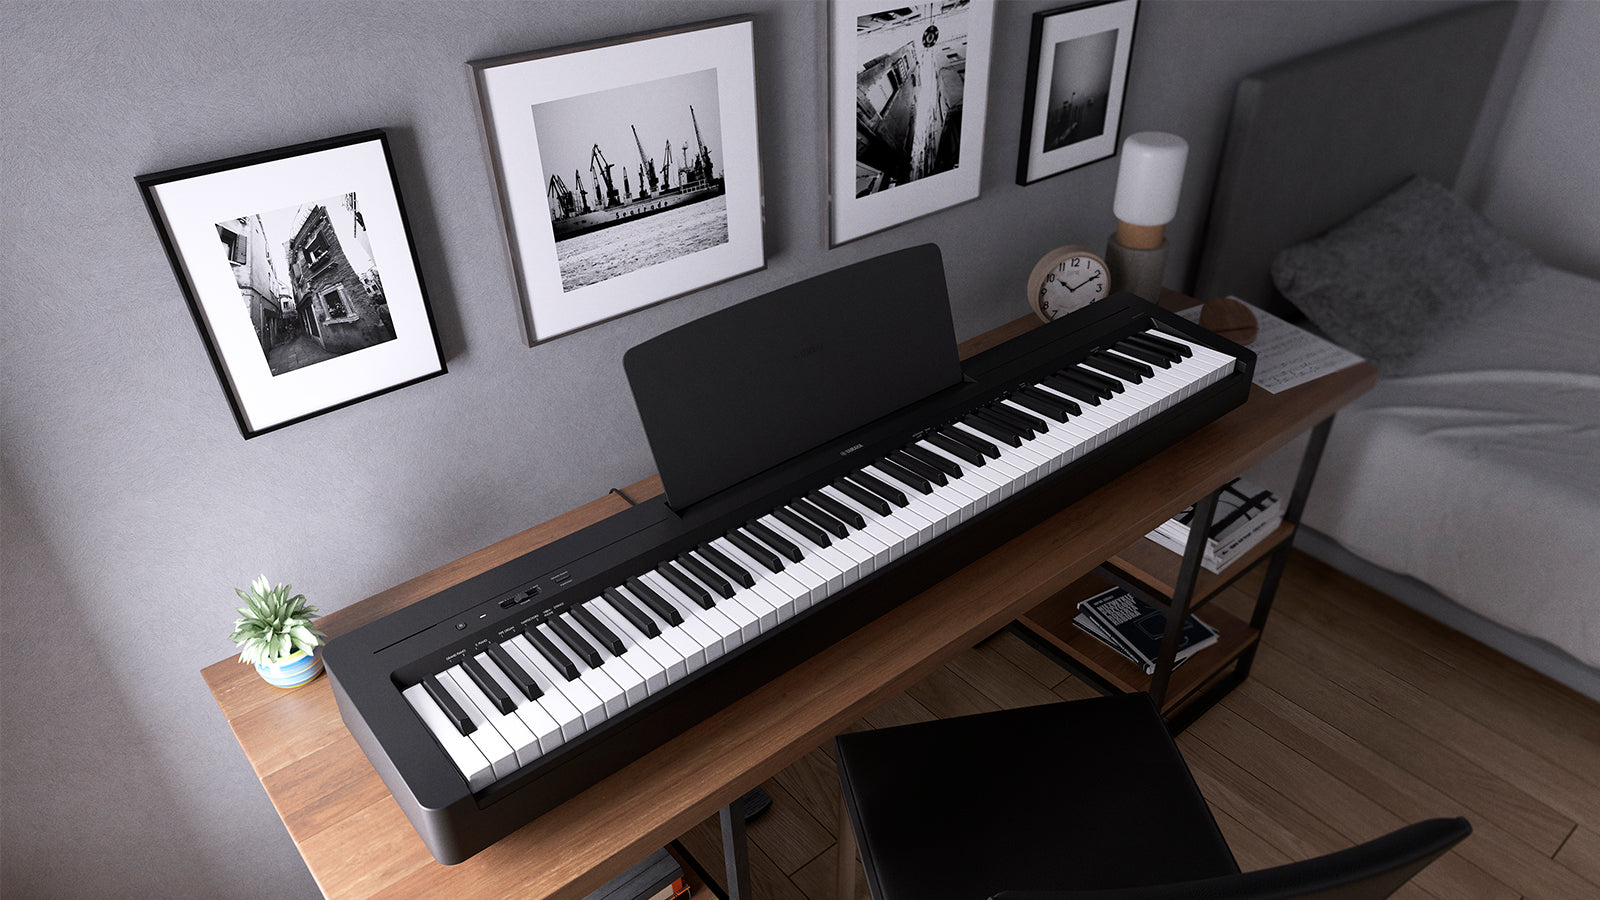 Buy Yamaha P-45 from £659.00 (Today) – Best Deals on